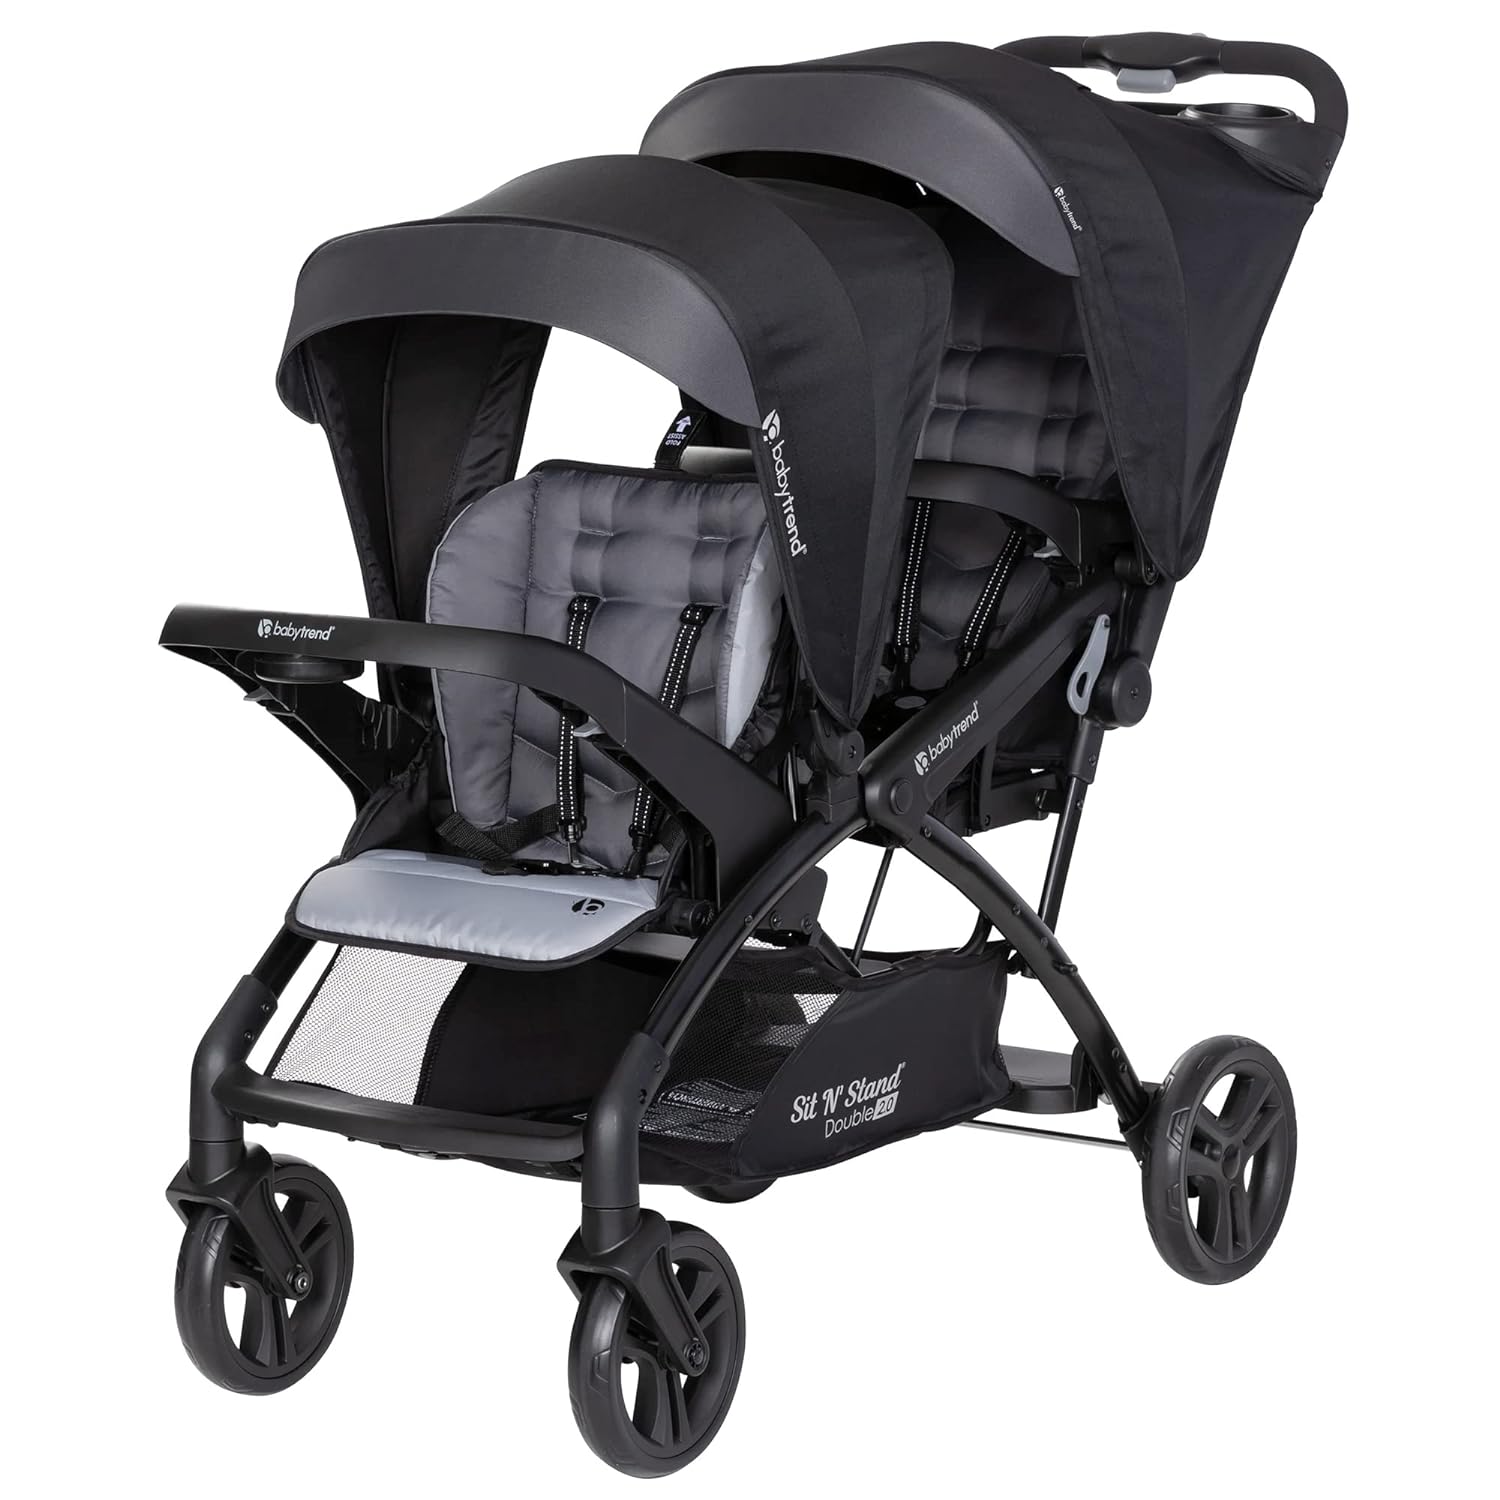 Baby Trend Sit N' Stand Double Stroller 2.0 DLX Review